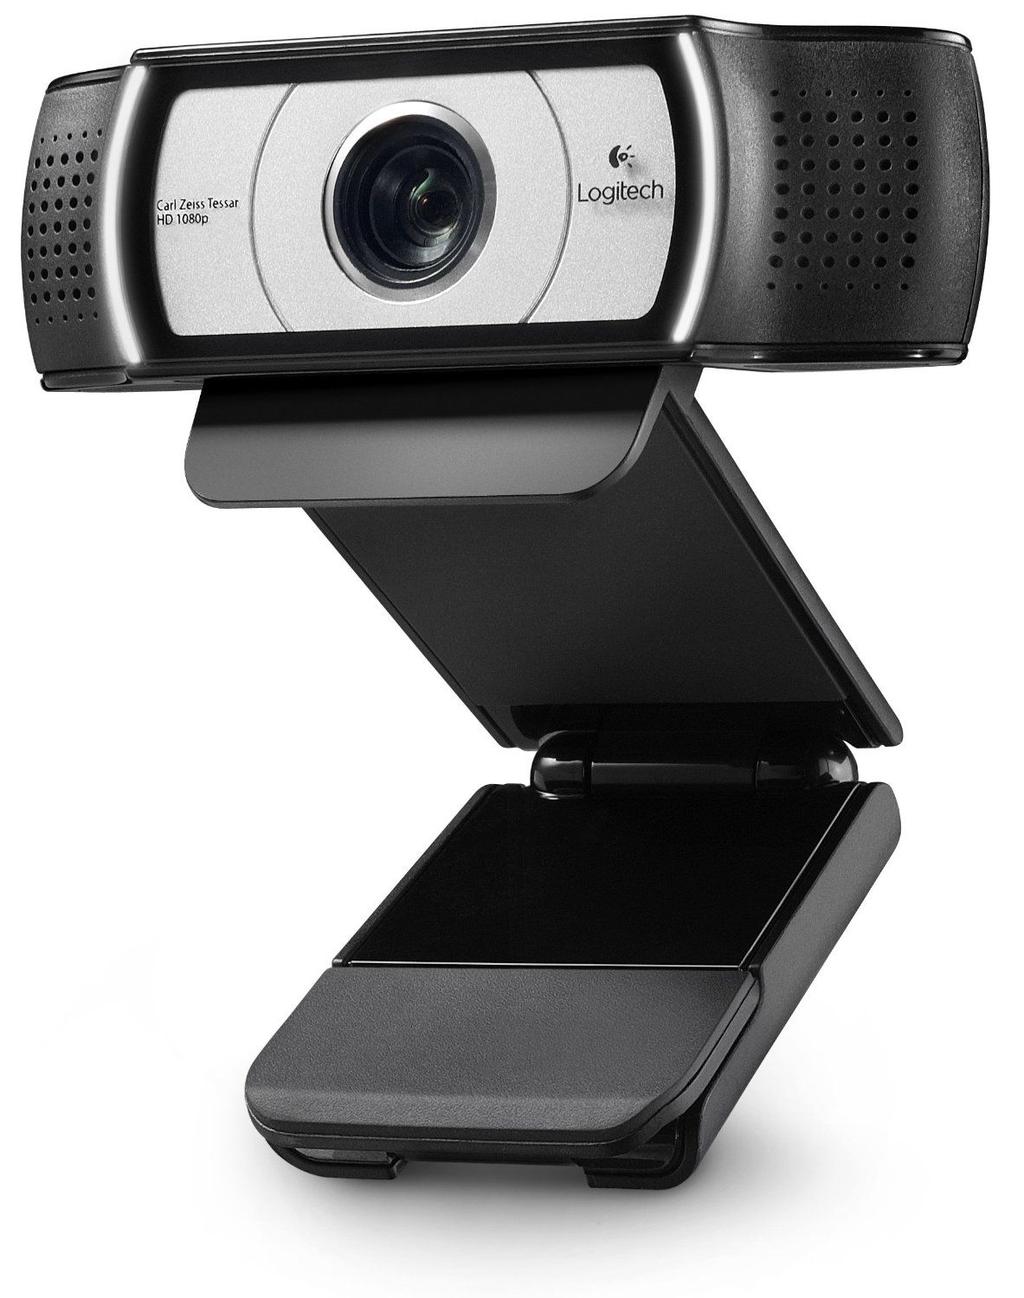 Webcam Setup Checklist For a more details on setting up your webcam to get great video images, read this more in-depth article How To Shoot Better Video With Your Webcam.